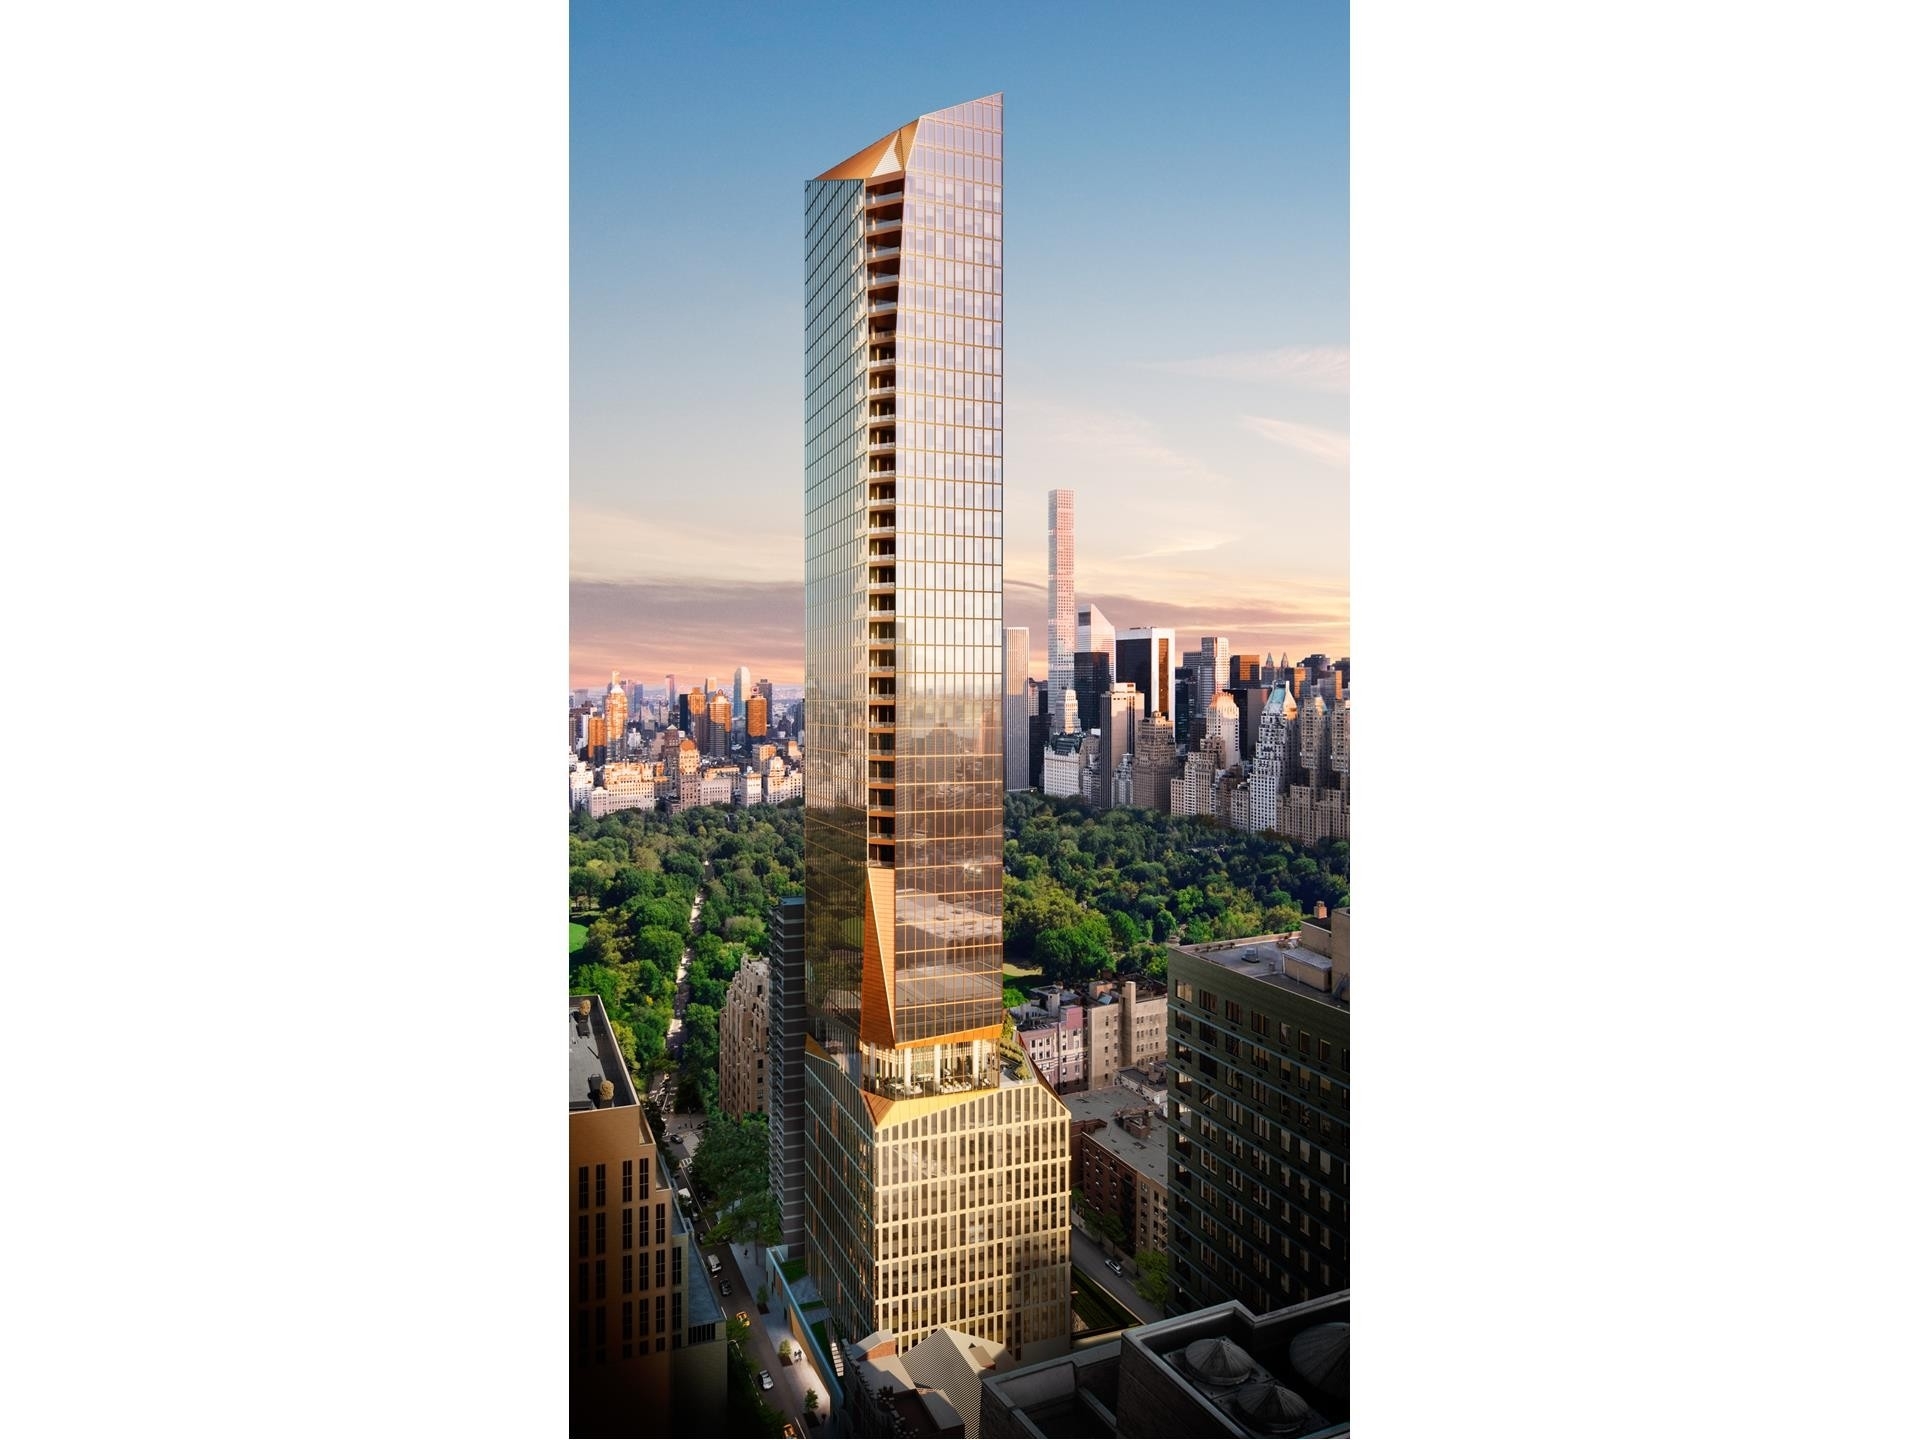 Condominium for Sale at 50 West 66Th Street, 50 W 66TH ST, 5F Lincoln Square, New York, New York 10023